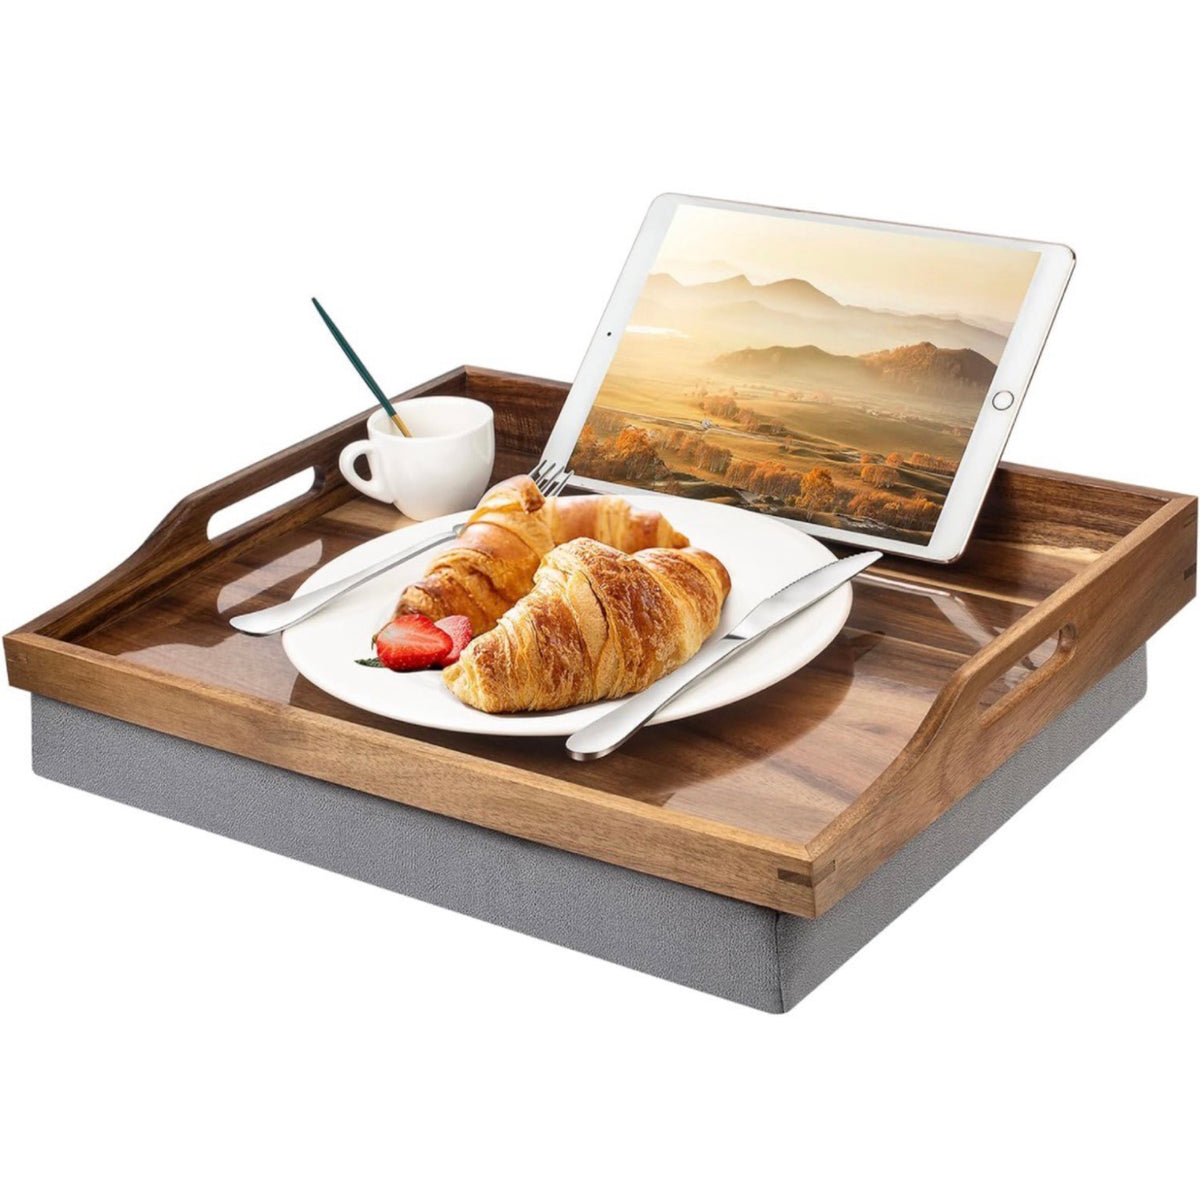 Acacia Wood Lap Desk with Cushion – Have Breakfast In Bed